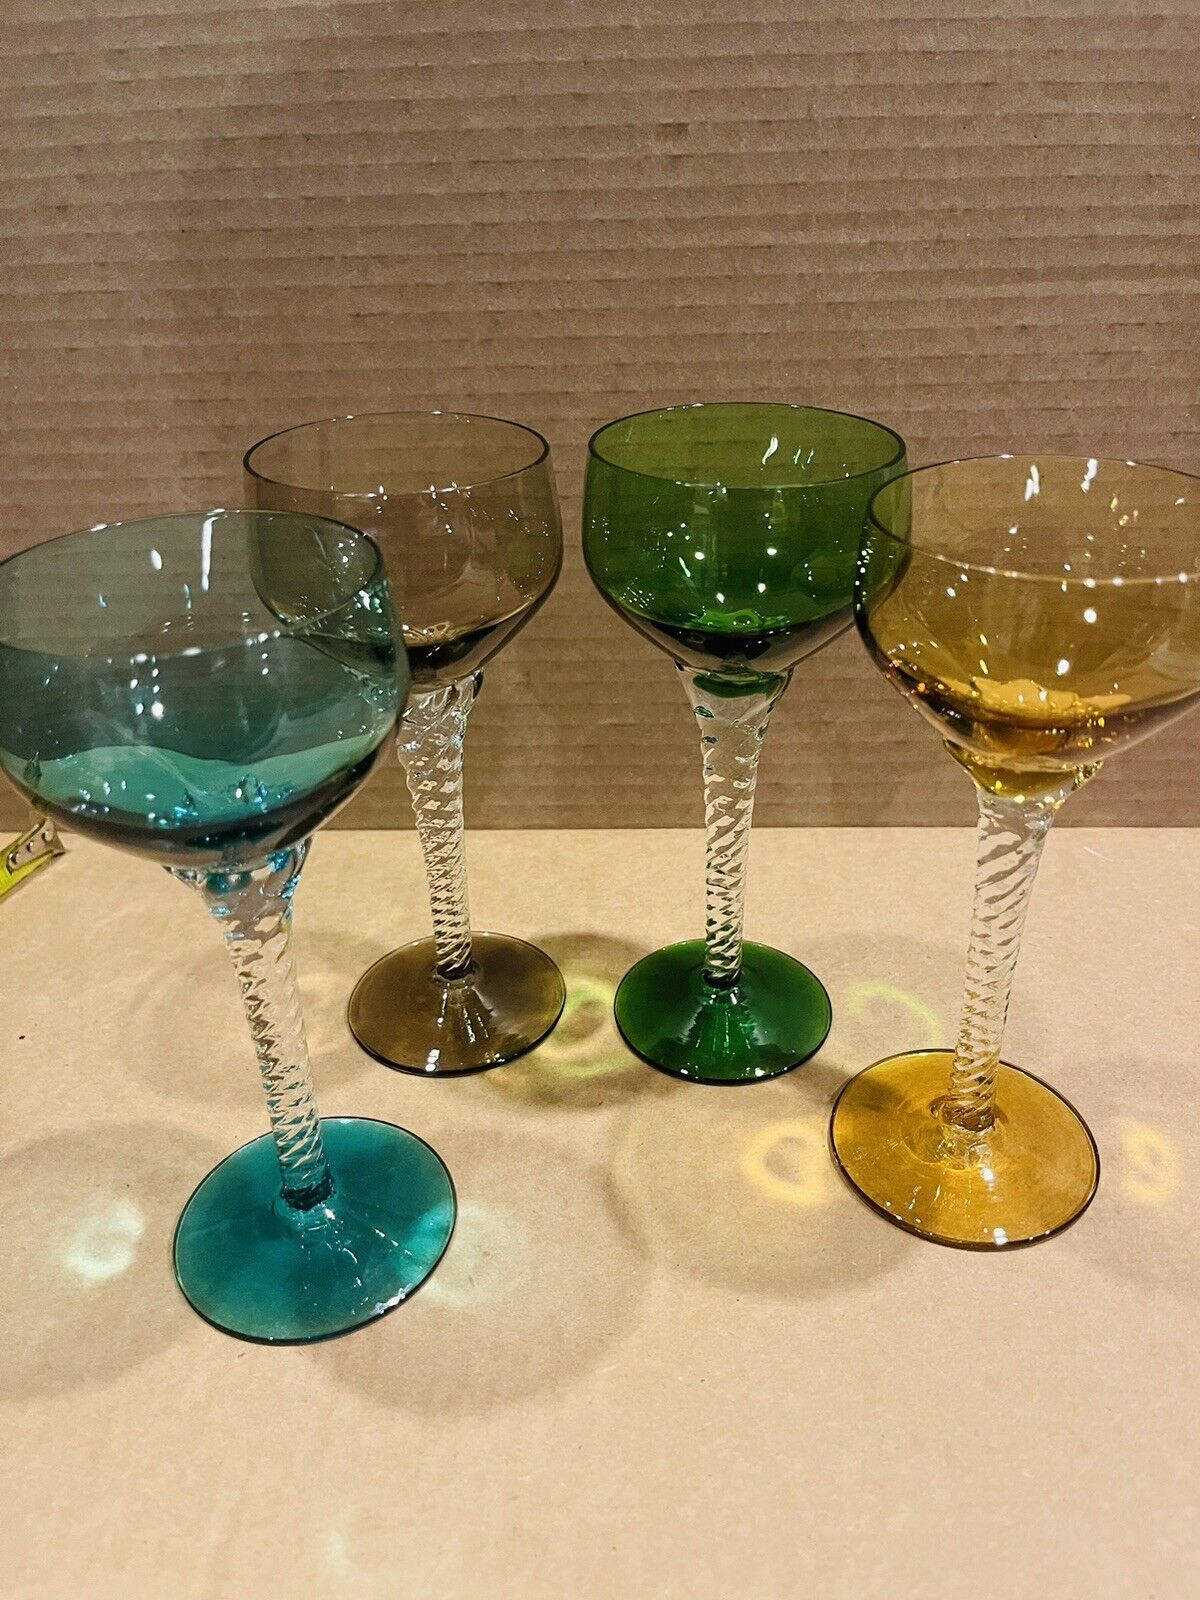 4 Vintage MCM? Crystal Twisted Stem Multicolors Wine/Champagne Glasses .QUALITY